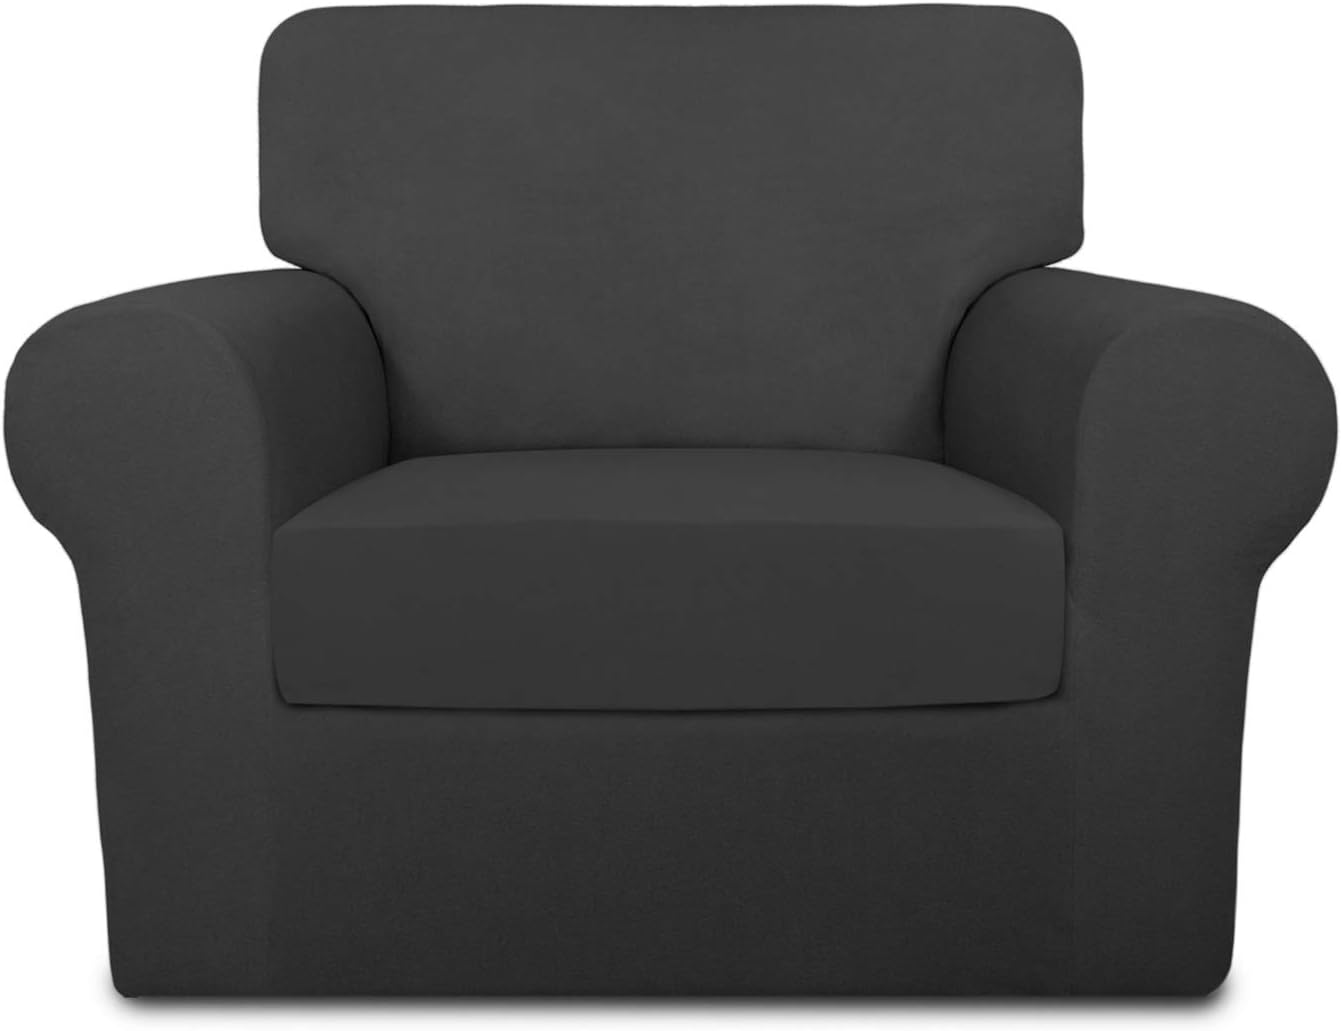 PureFit 2 Pieces Super Stretch Chair Couch Cover for 1 Cushion Slipcover  Spandex Non Slip Soft Sofa Cover for Kids, Pets, Washable Furniture Protector (Chair, Dark Gray)